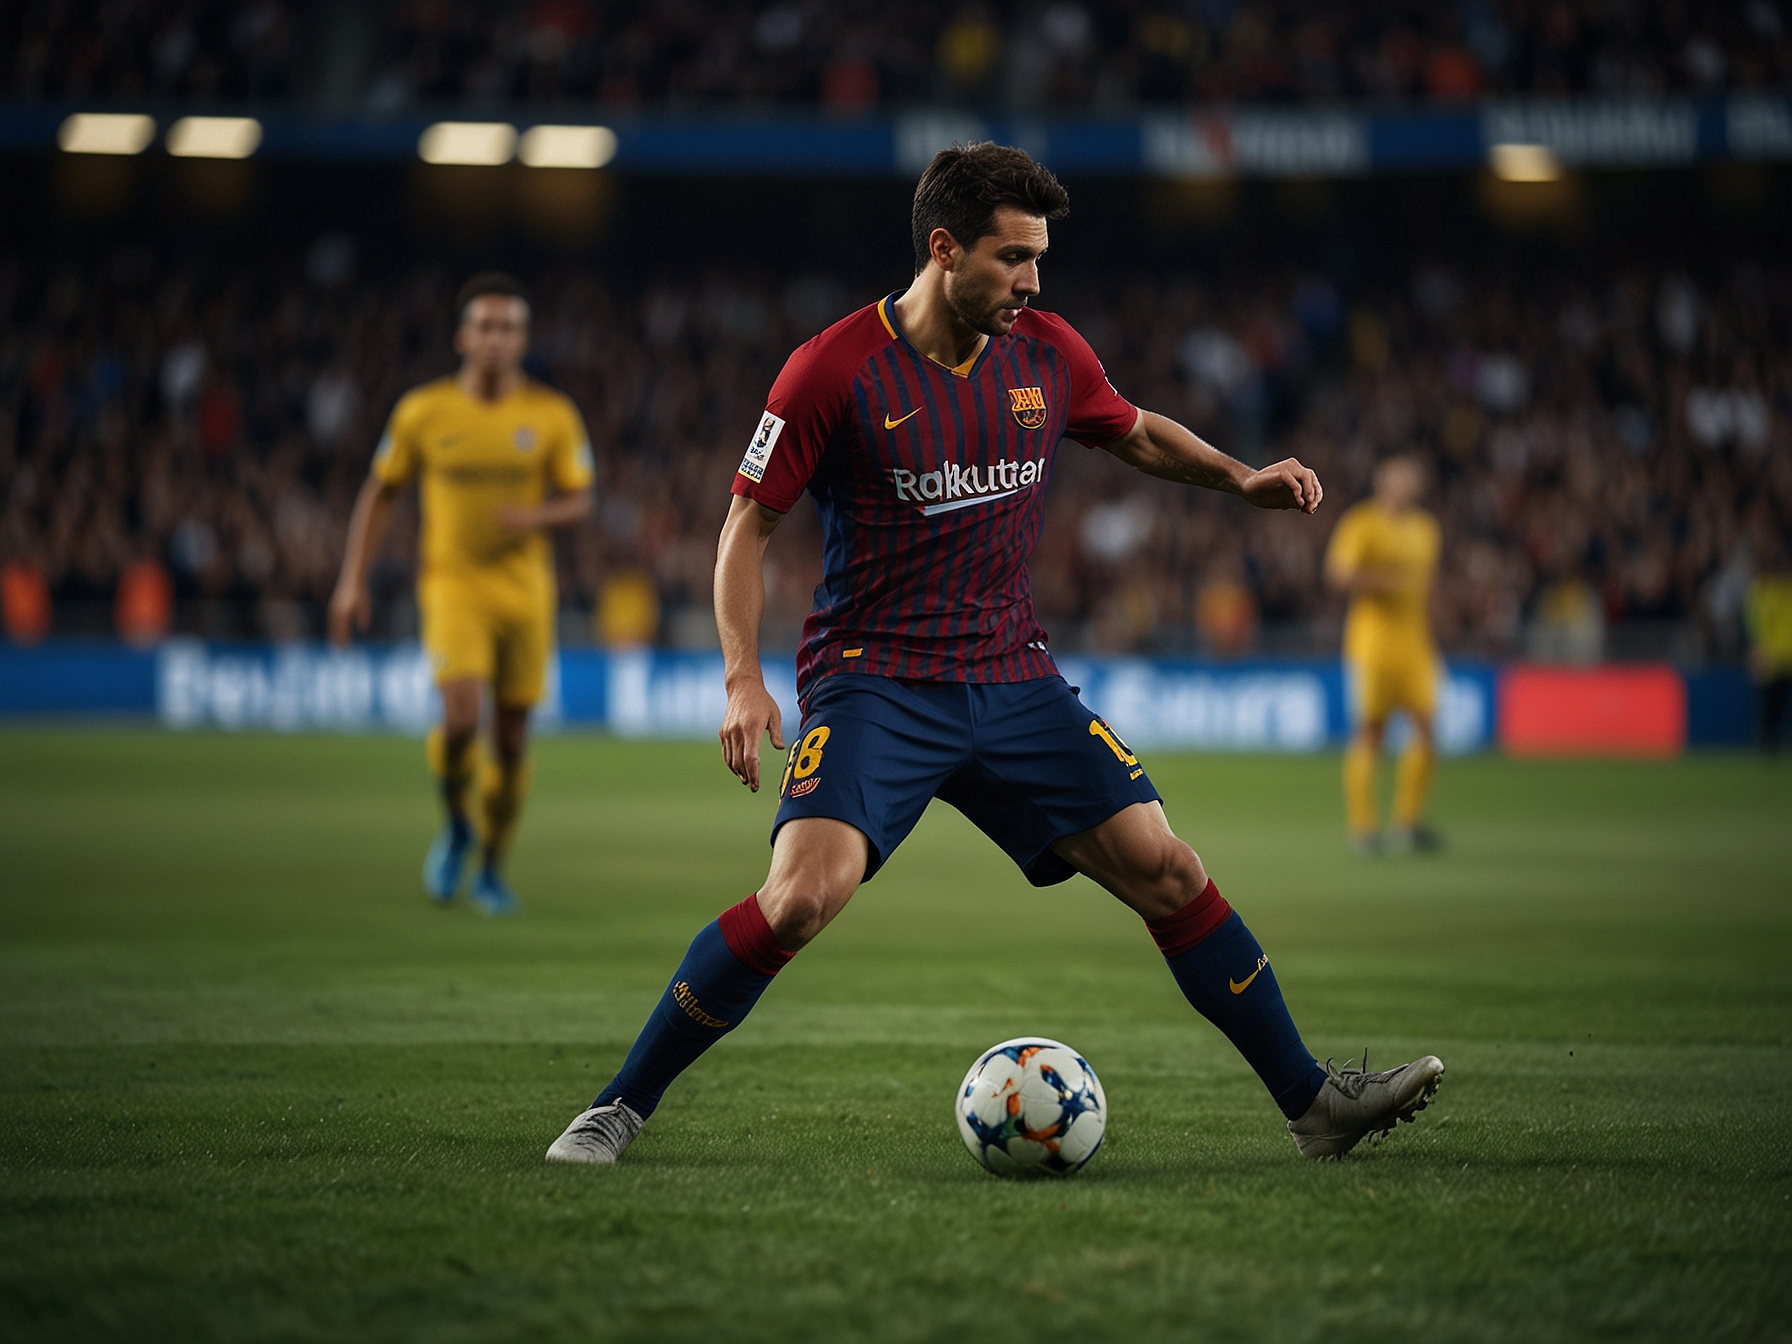 An exciting action shot of Marc Guiu in a Barcelona jersey, showcasing his technical skills on the ball during a match, reflecting why he caught Chelsea’s attention.